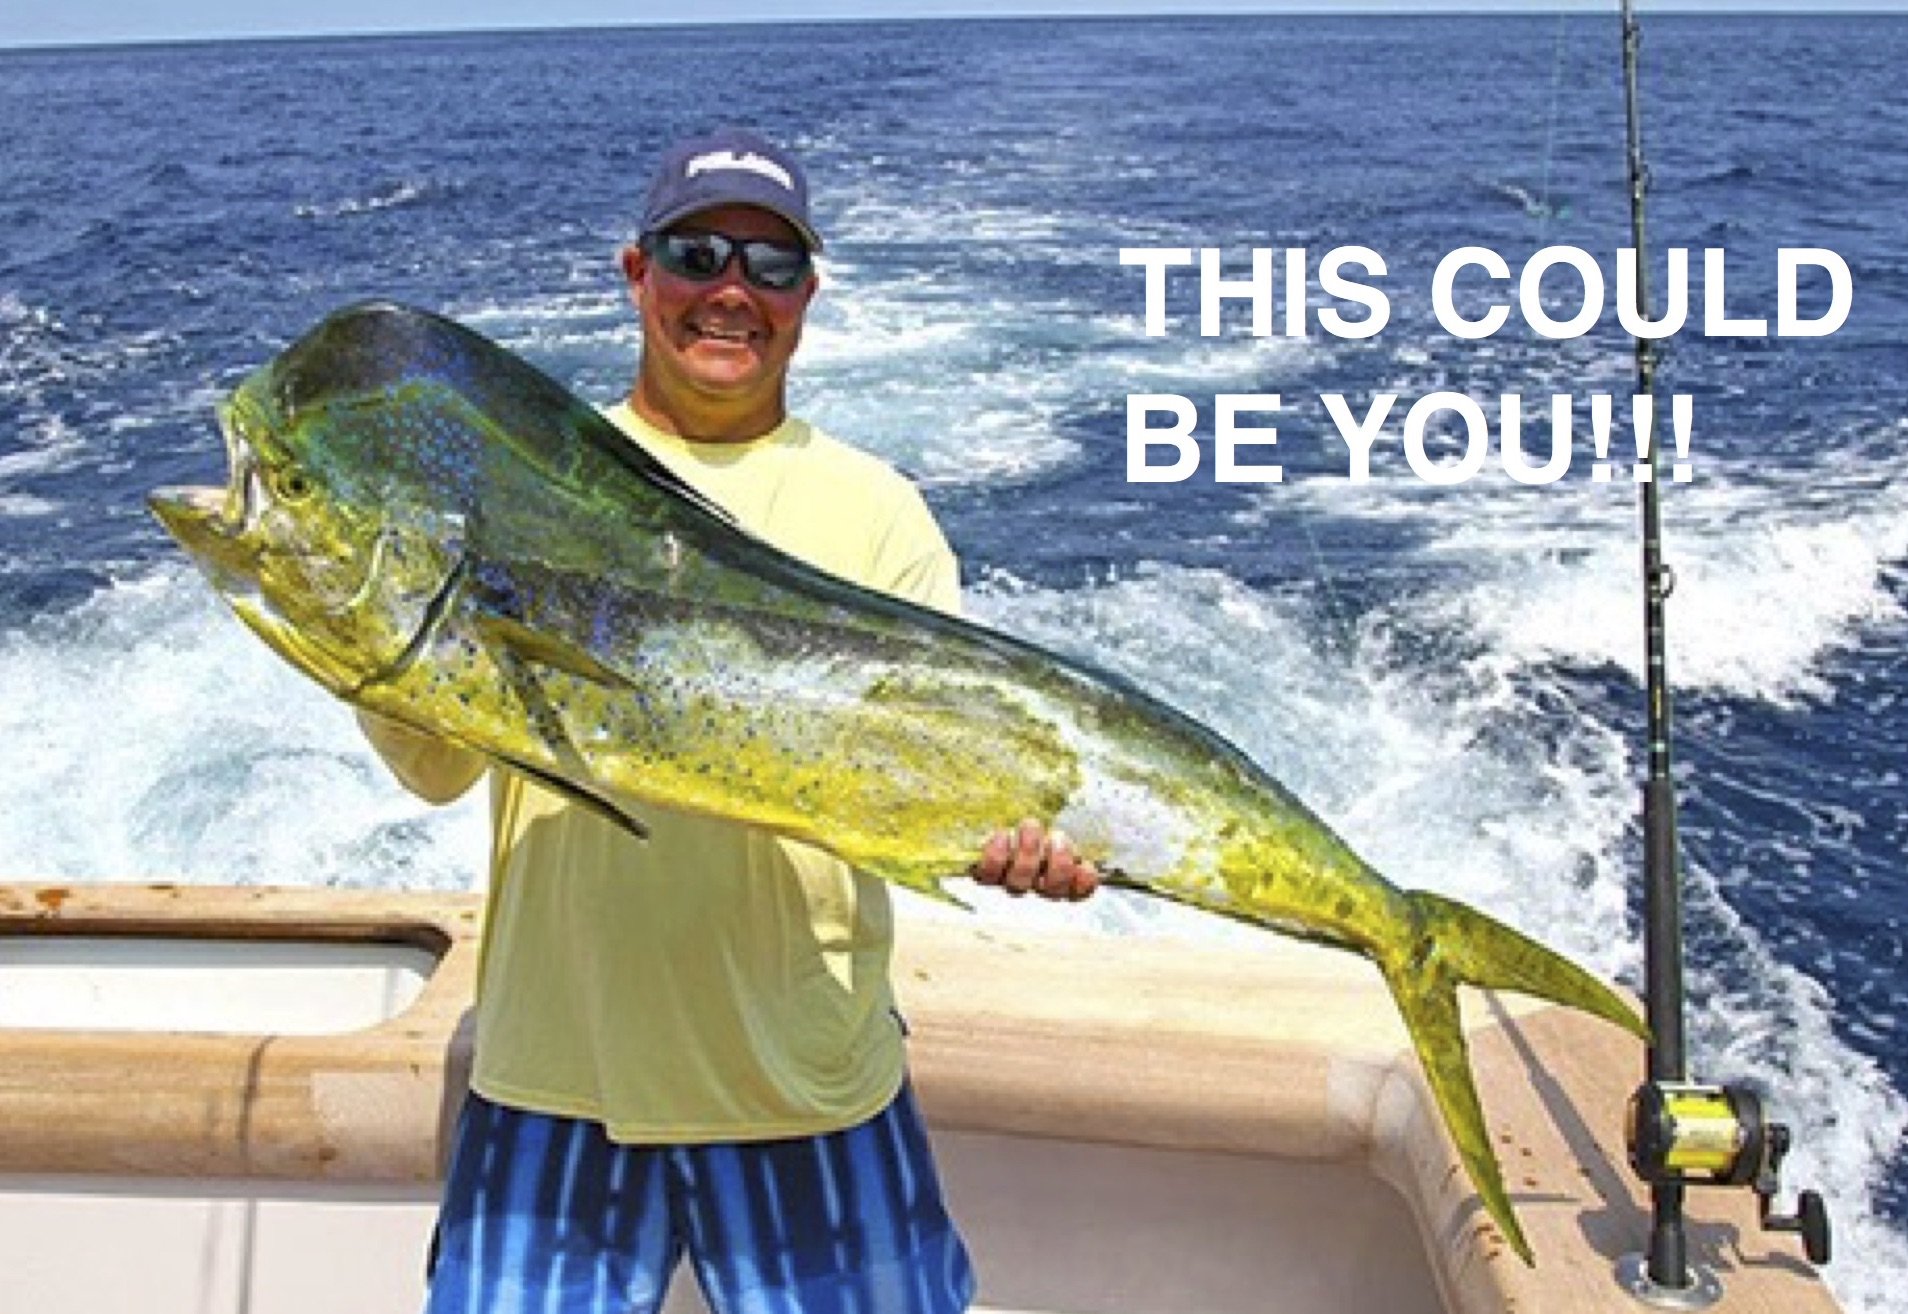 Free Offshore Fishing Trip Giveaway